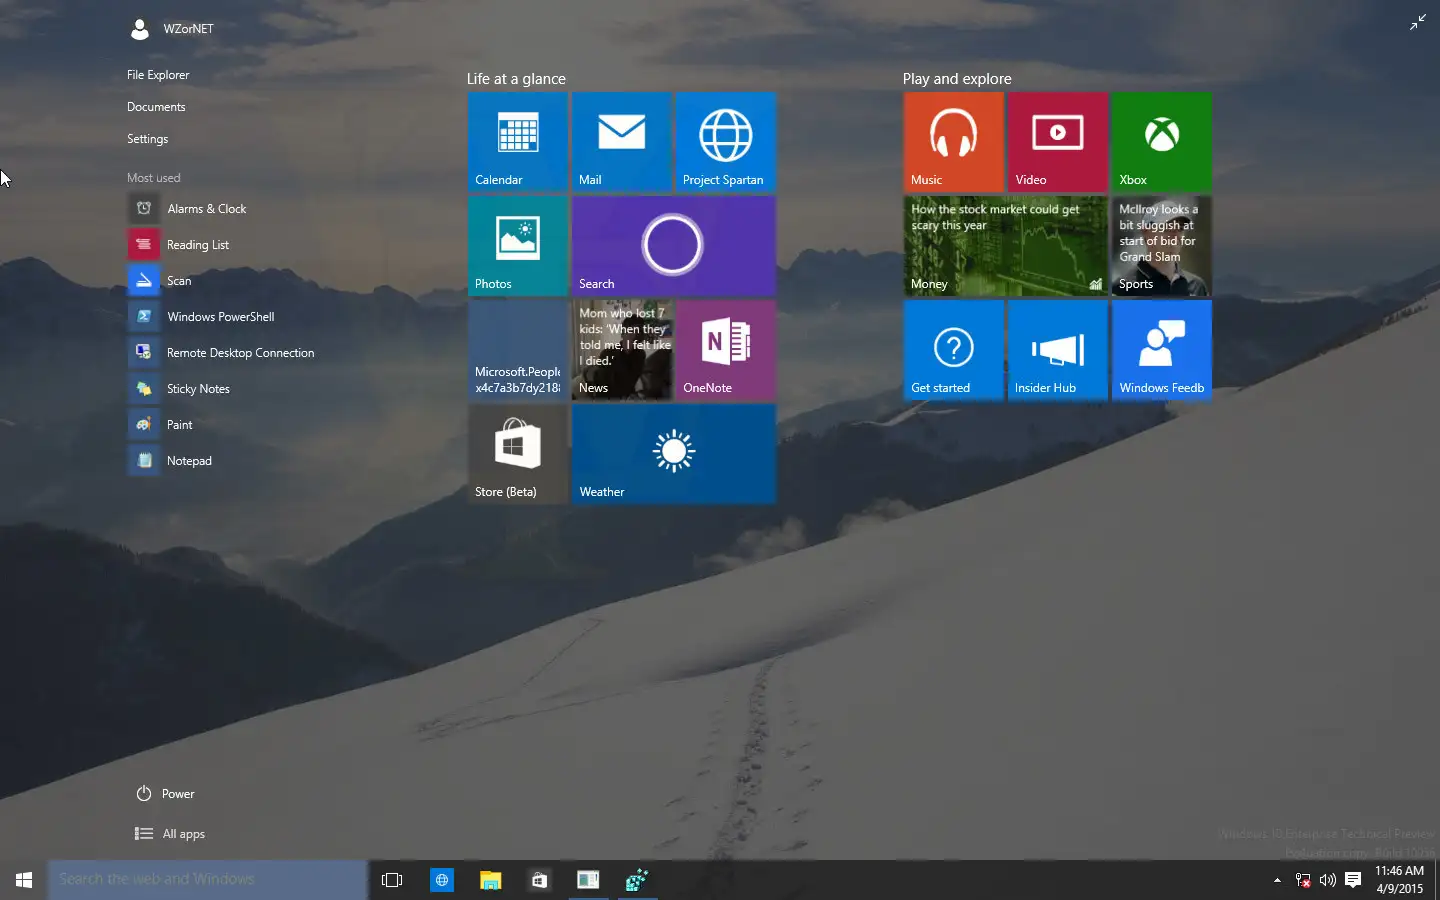 Windows 10 build 10056: New Start menu improvements and system tray clock refinements